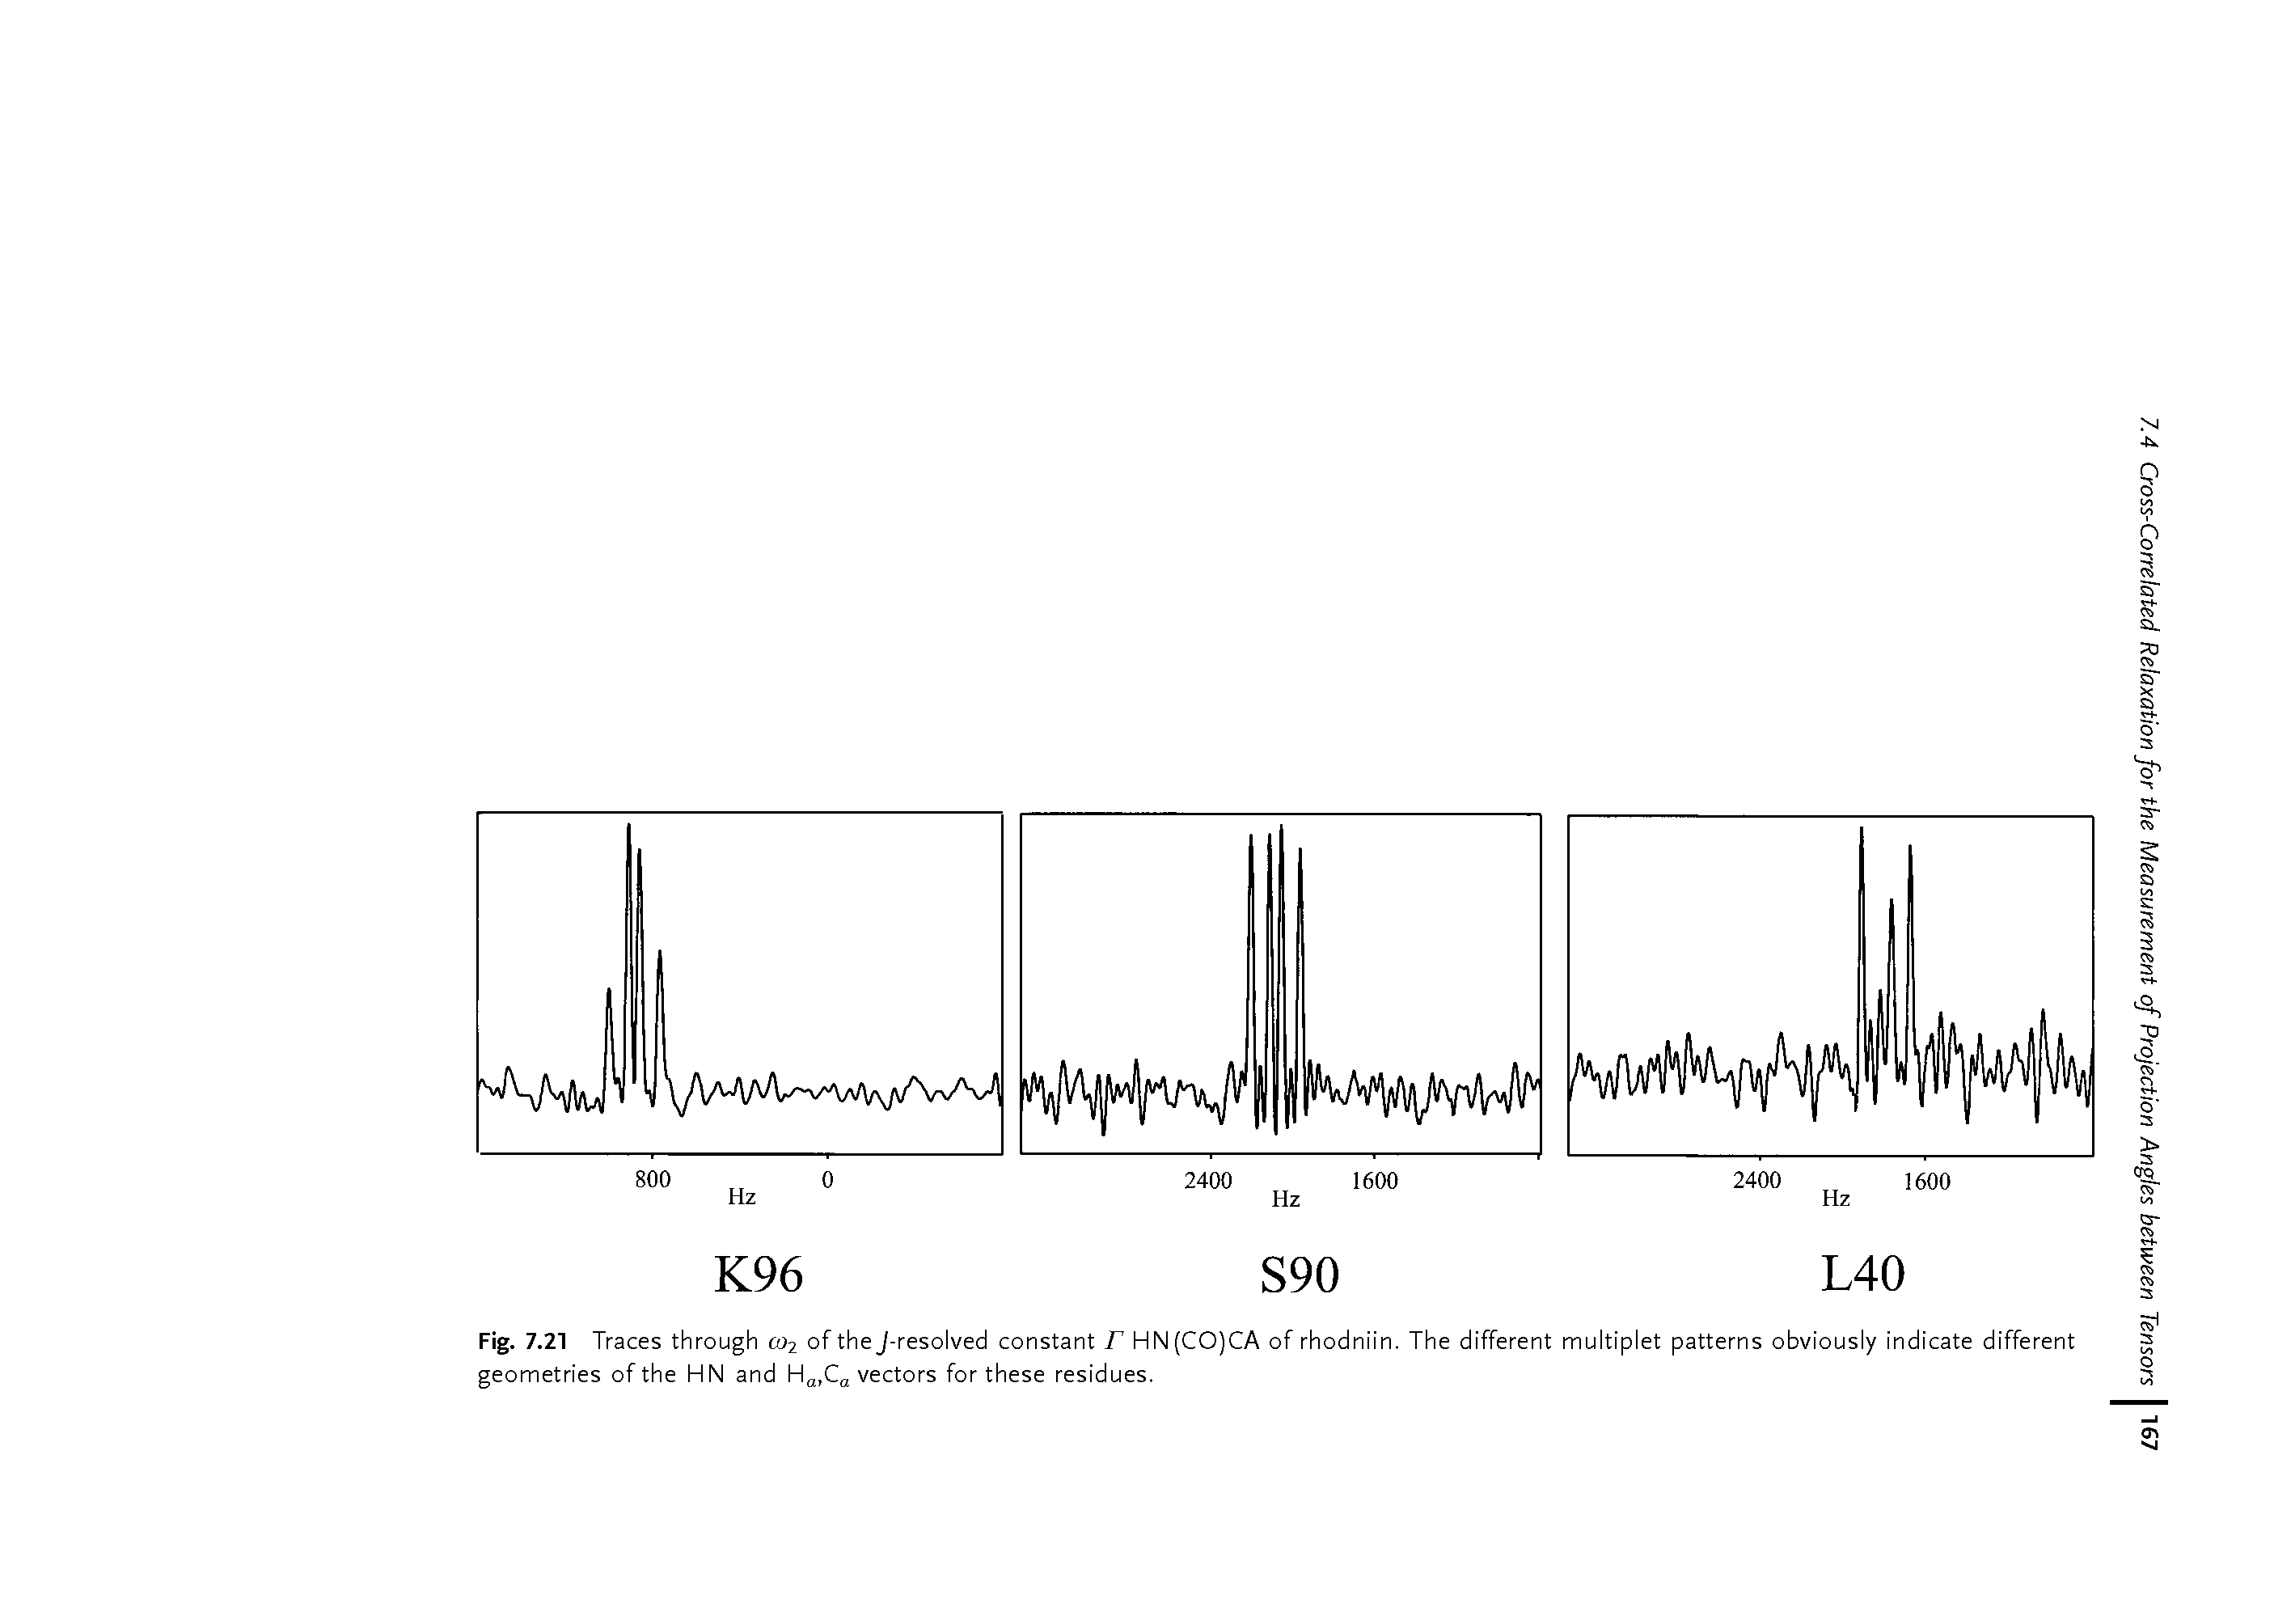 Fig. 7.21 Traces through co2 of the J-resolved constant r HN(CO)CA of rhodniin. The different multiplet patterns obviously indicate different geometries of the HN and Ha,Ca vectors for these residues.